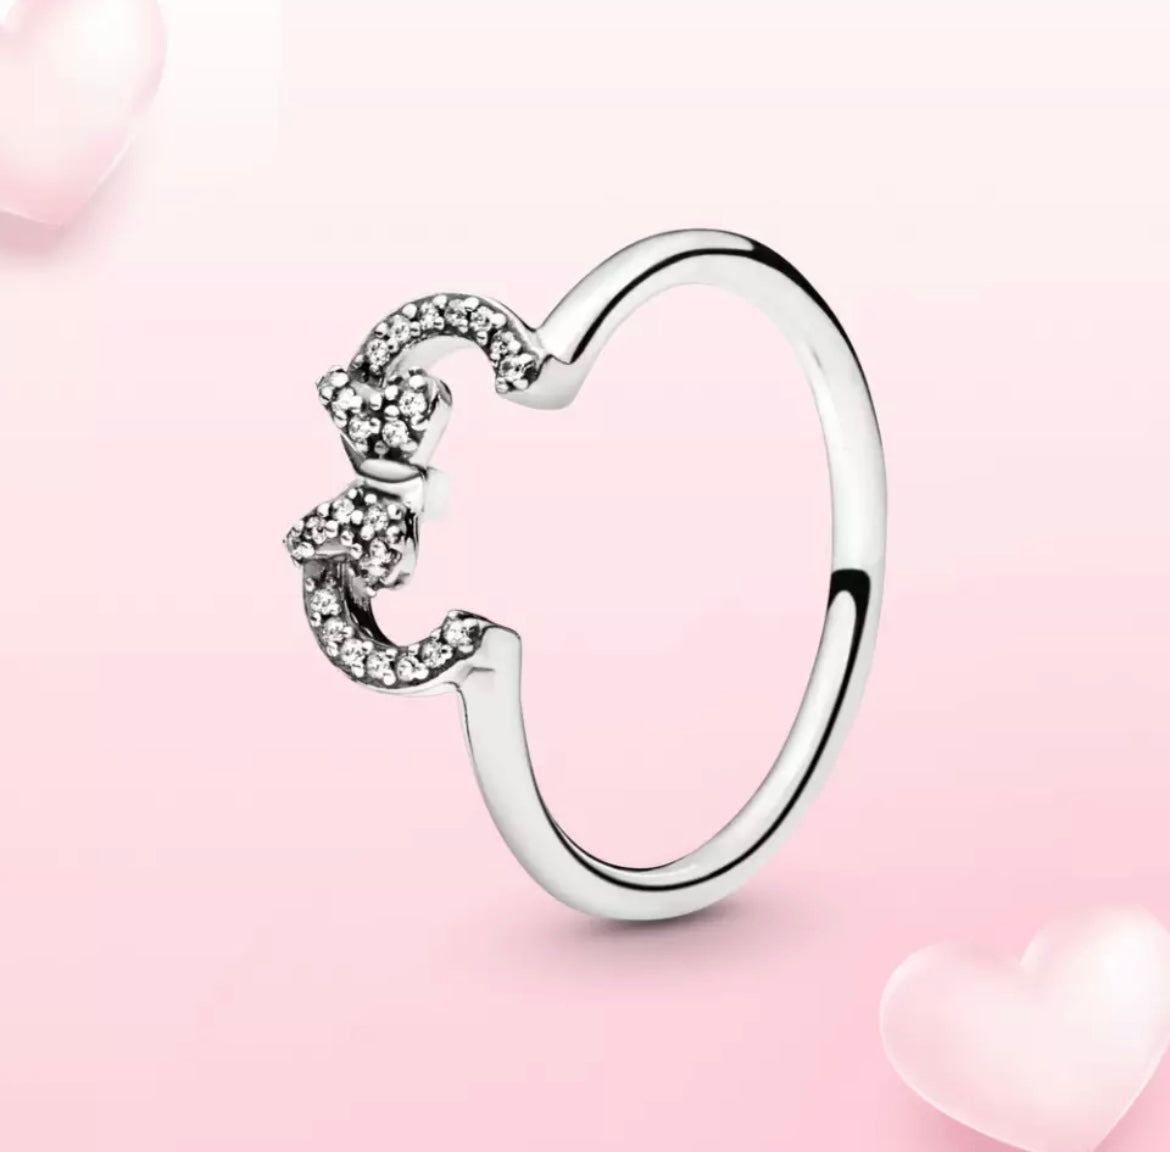 Minnie Mouse Ears Ring